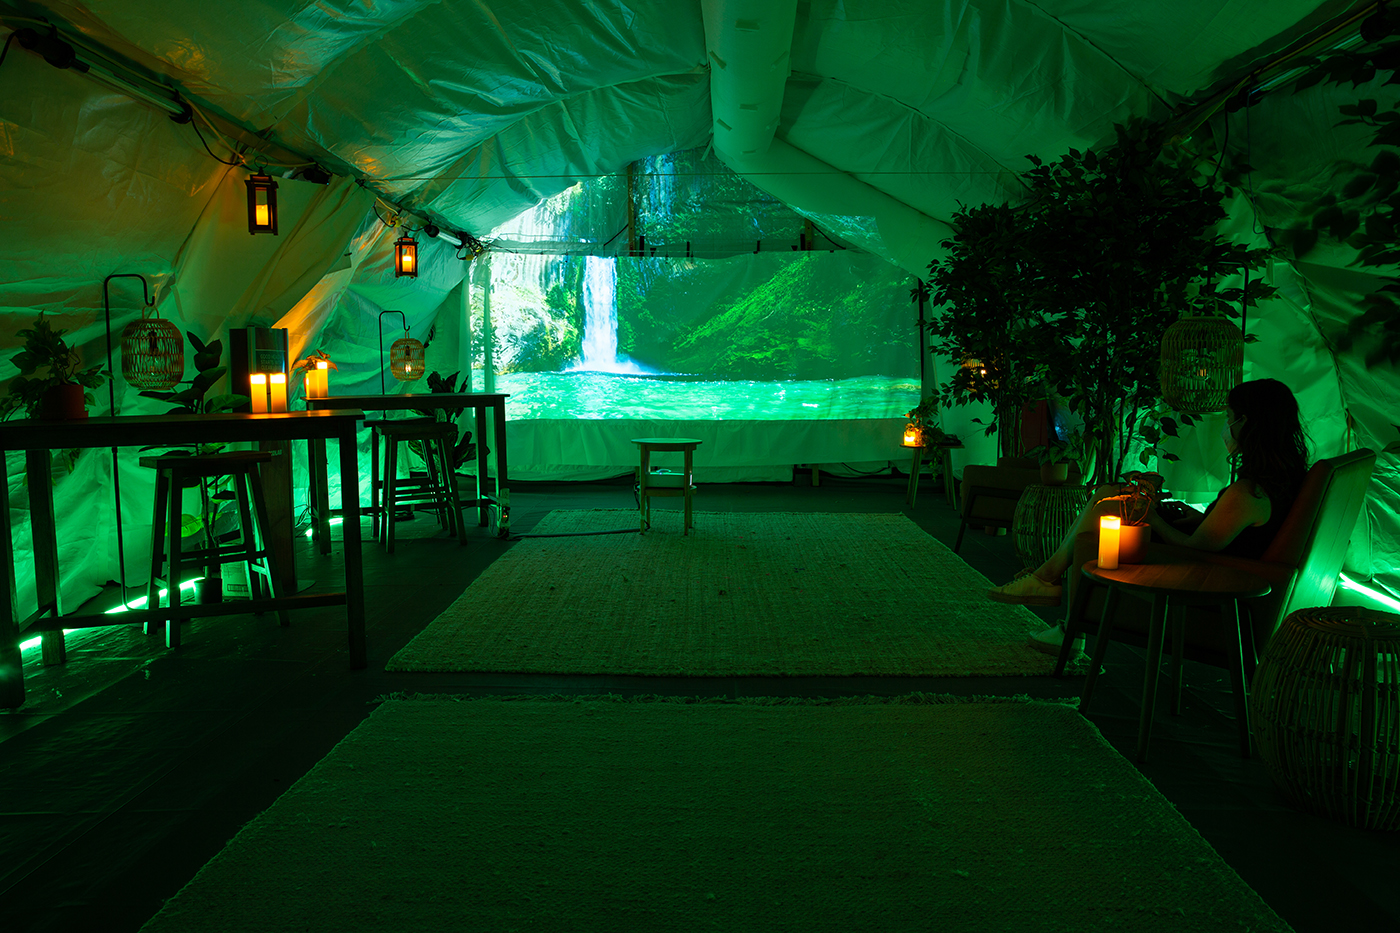 A photo representing New York. A cosy space washed in green, with someone curled up in an armchair to the right. The space is in a tent with candles, and at the end you can see a projection of a waterfall and greenery.